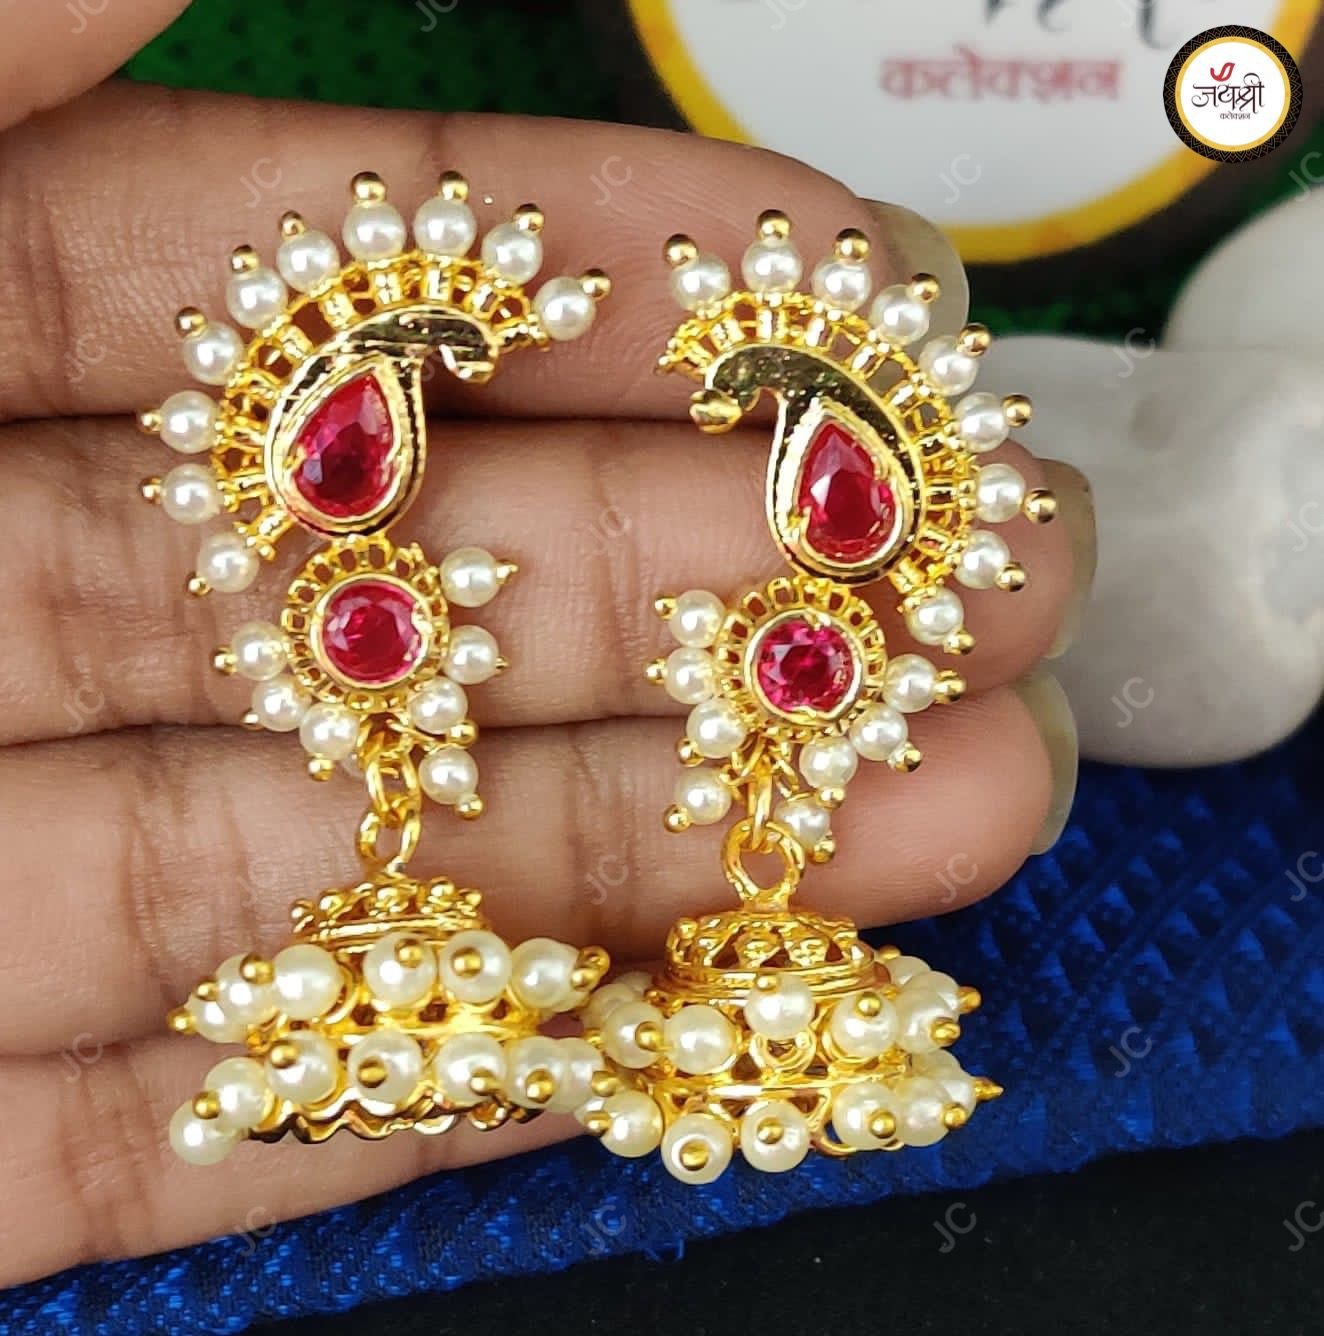 Gold Plated Party Wear Traditional Pearl Jhumki Earrings at Rs 120.00 |  Mumbai| ID: 25186408430